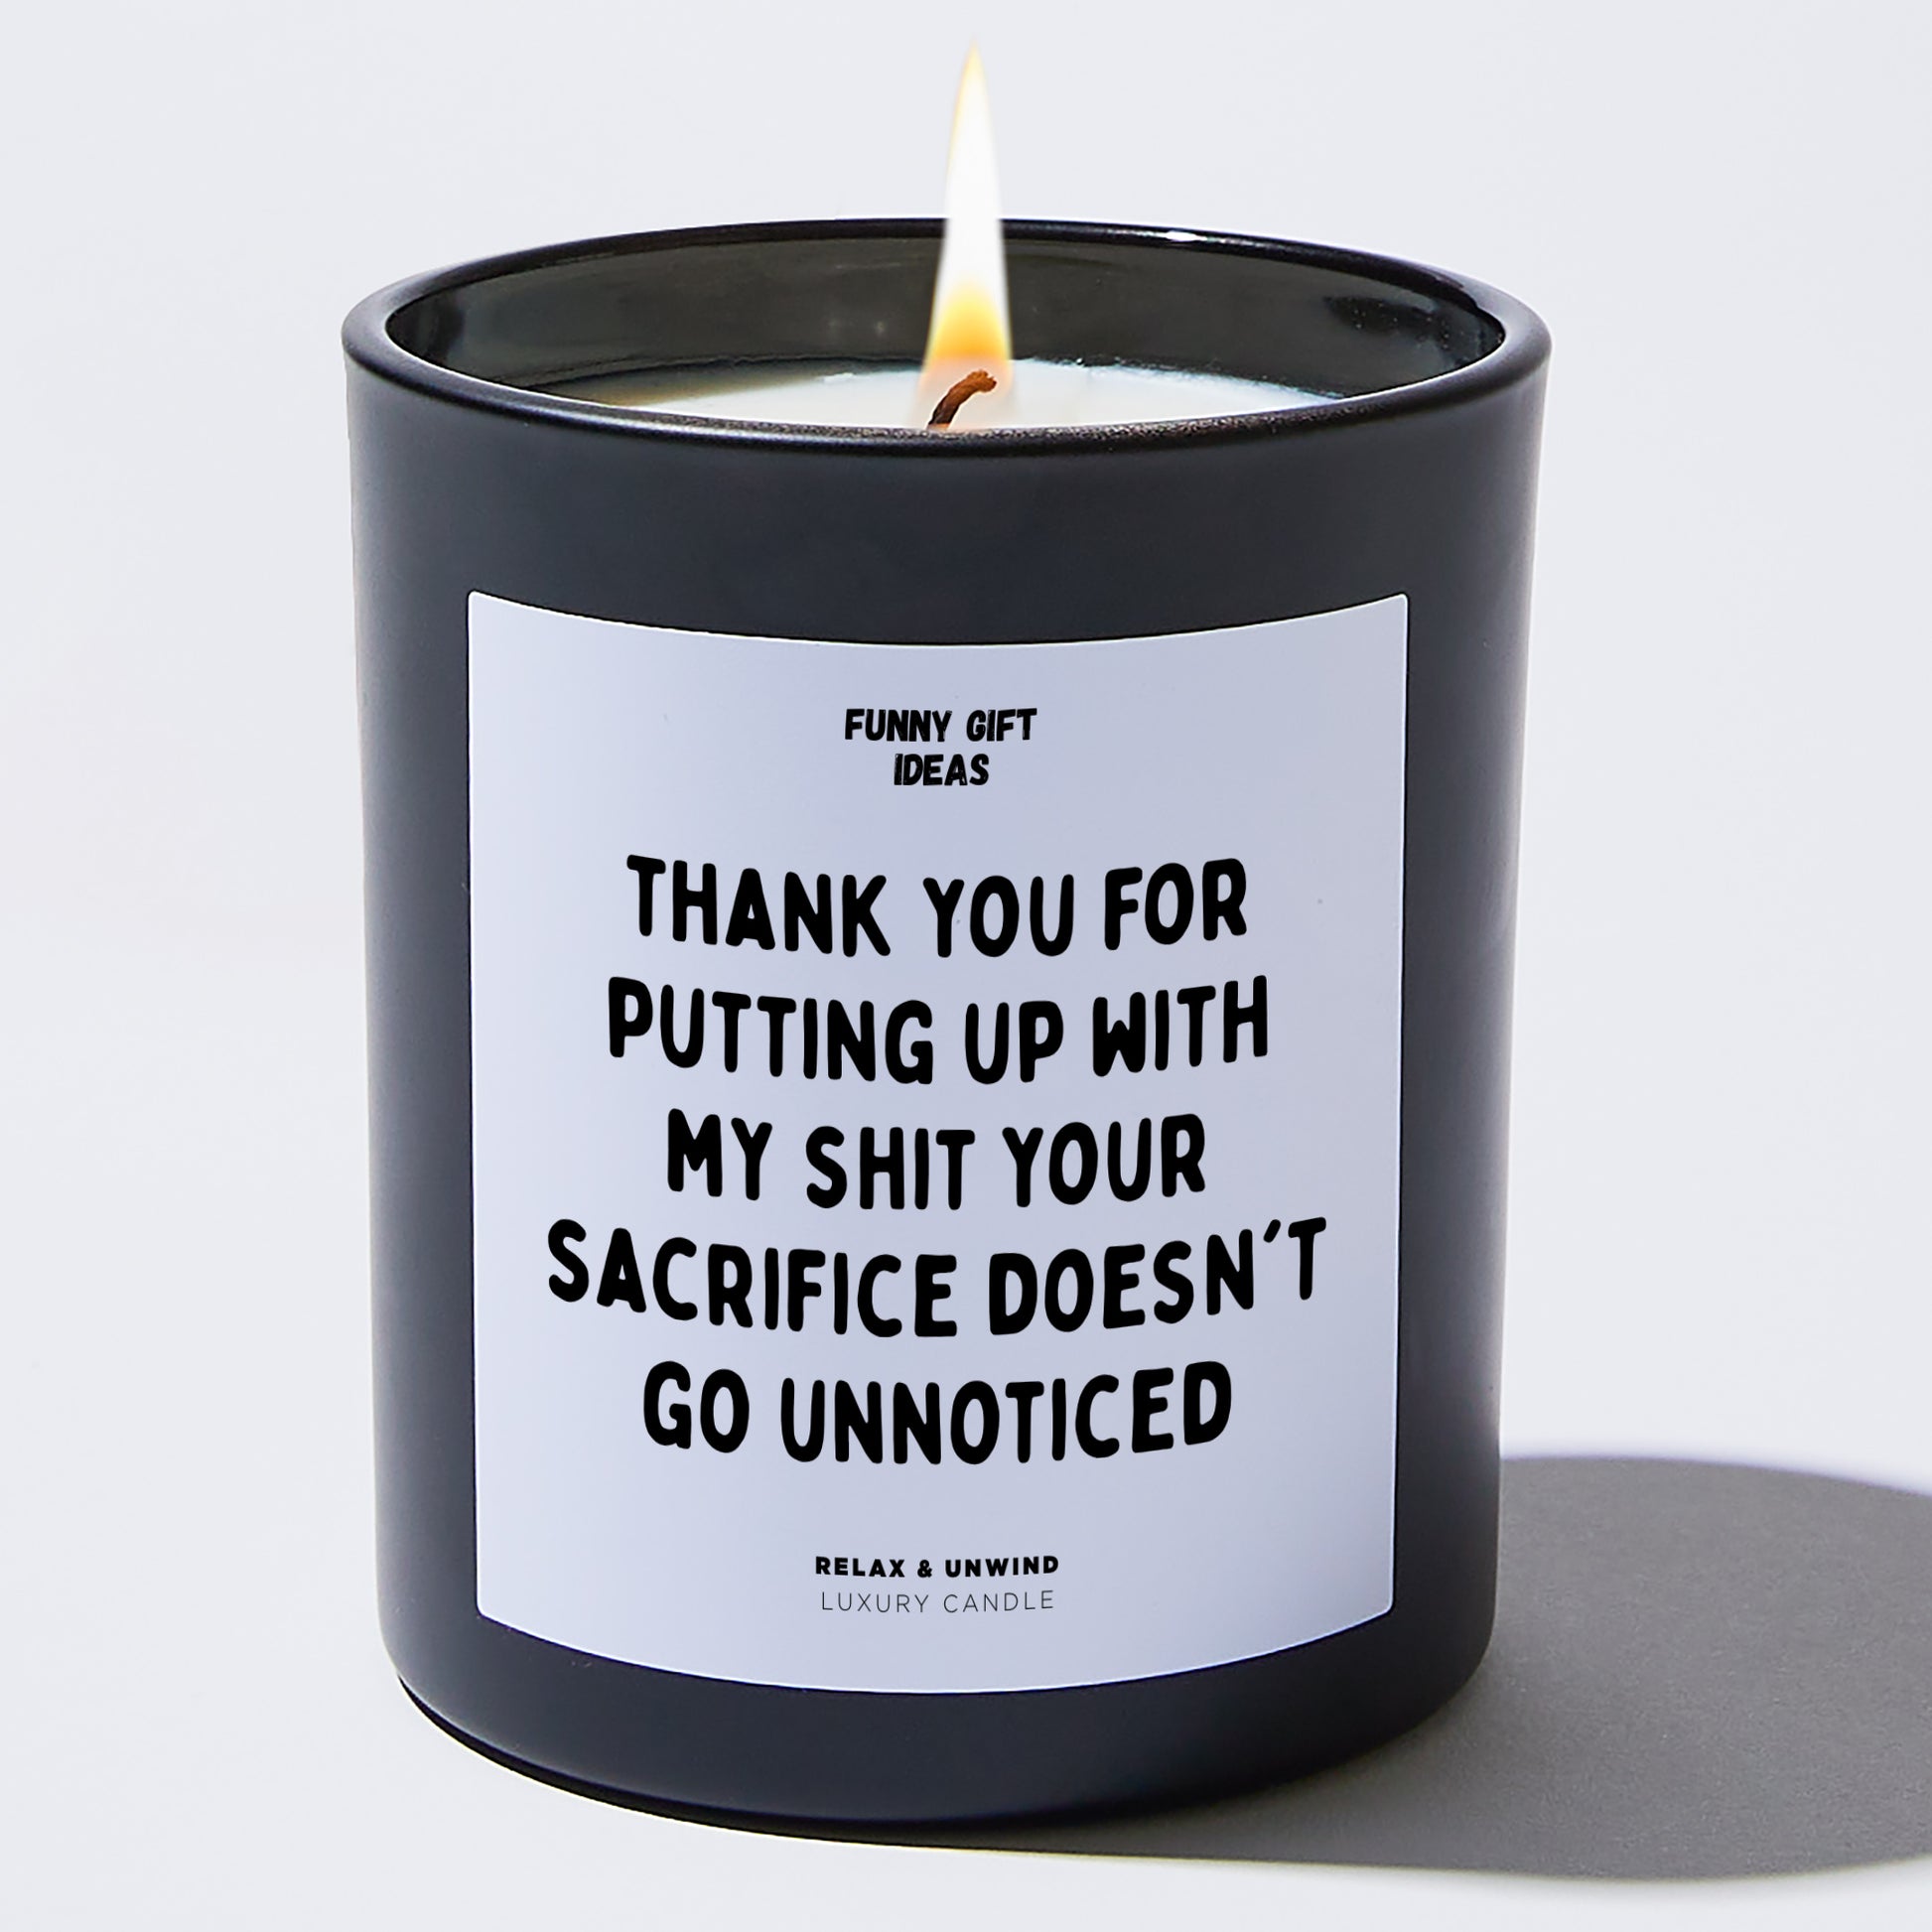 Anniversary Thank You for Putting Up With My Shit. Your Sacrifice Doesn't Go Unnoticed - Funny Gift Ideas